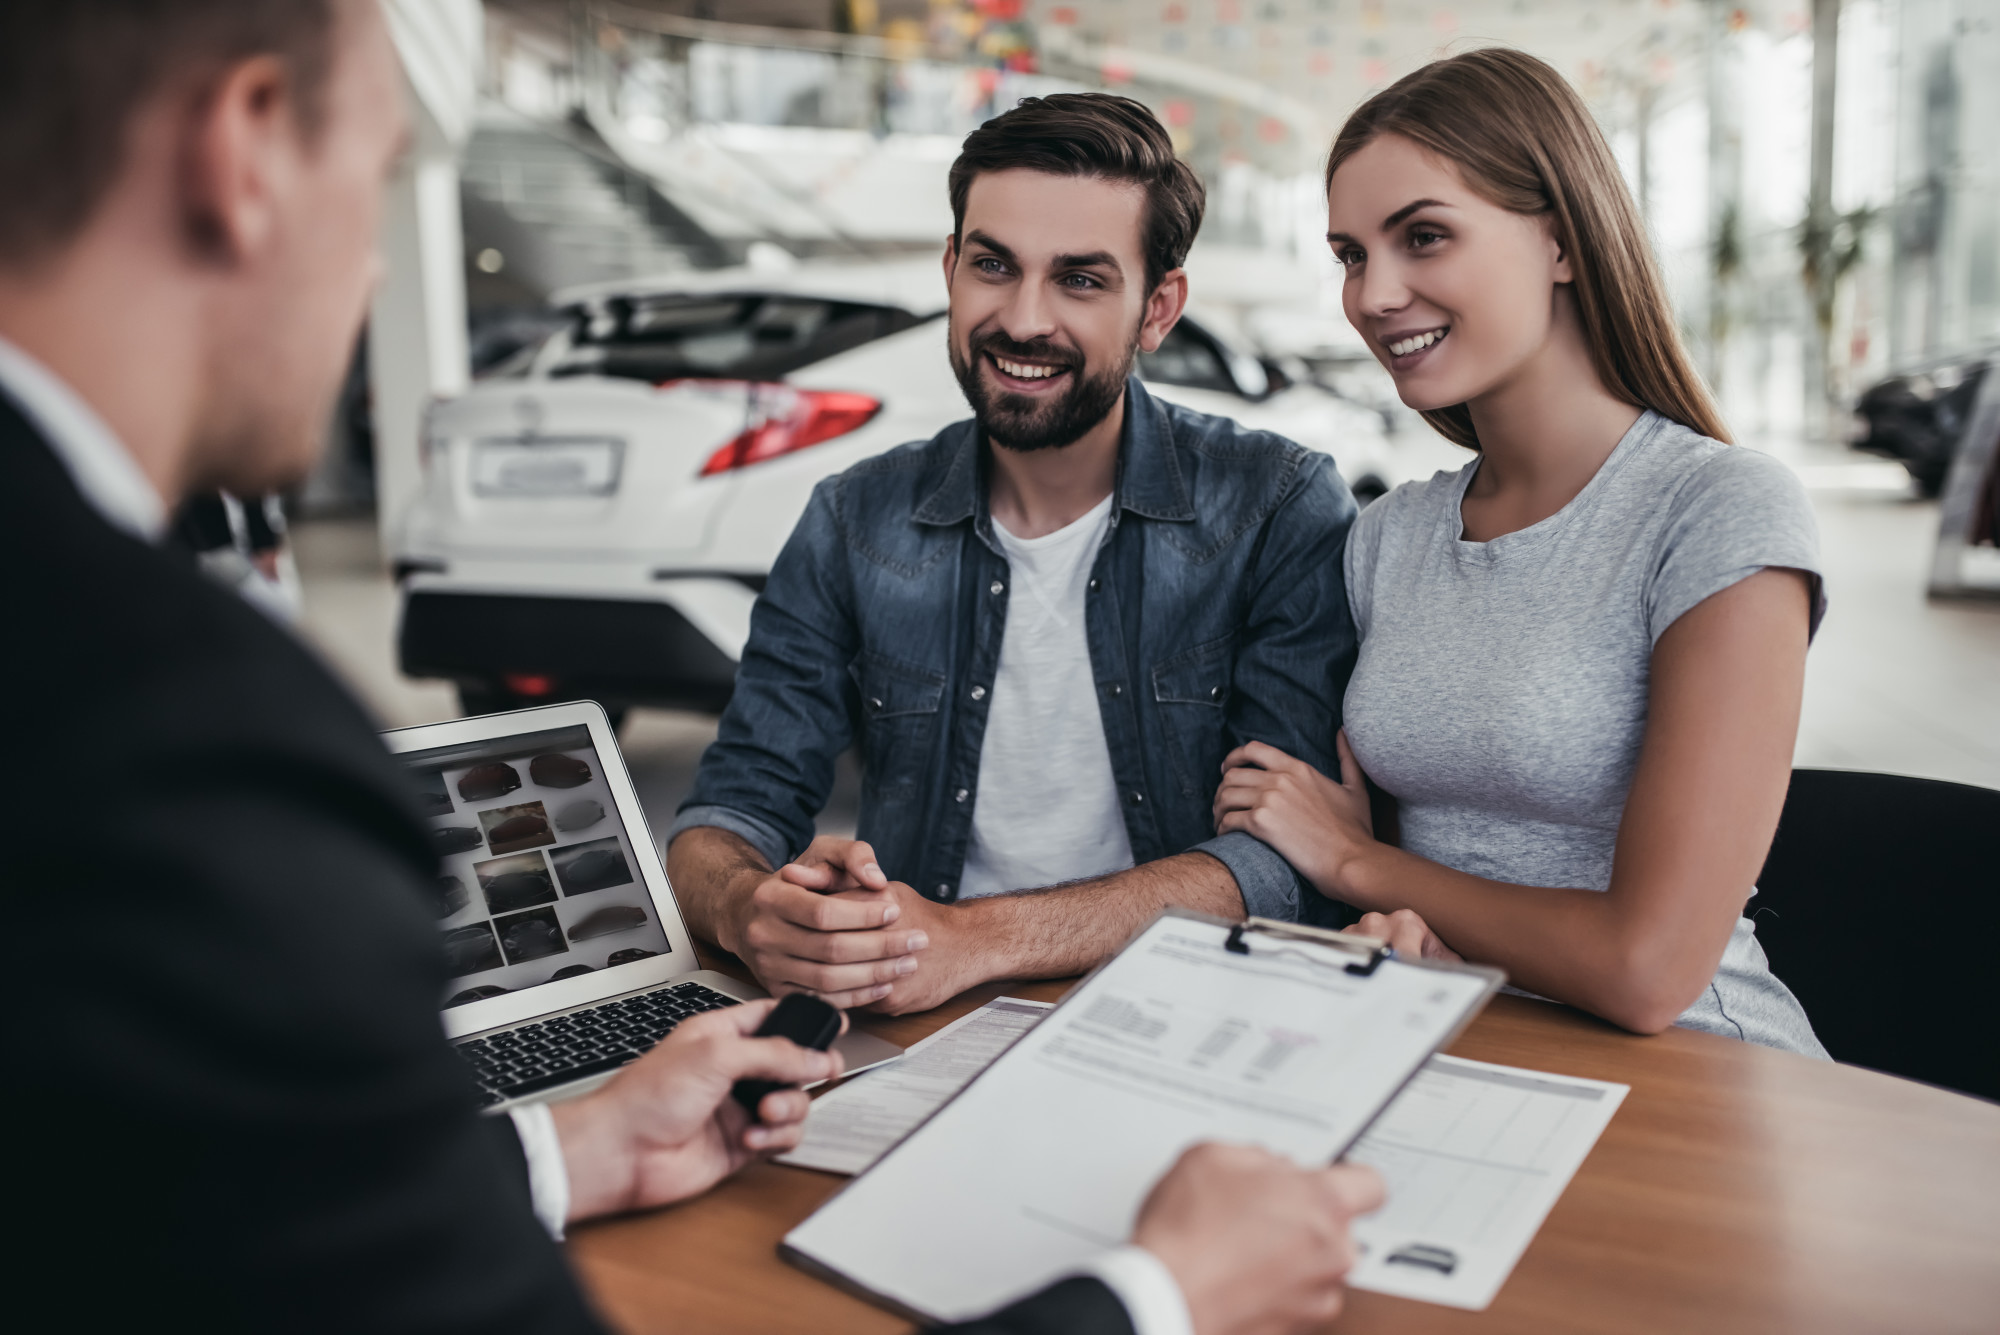 5 Things To Know About Getting a Bad Credit Auto Loan